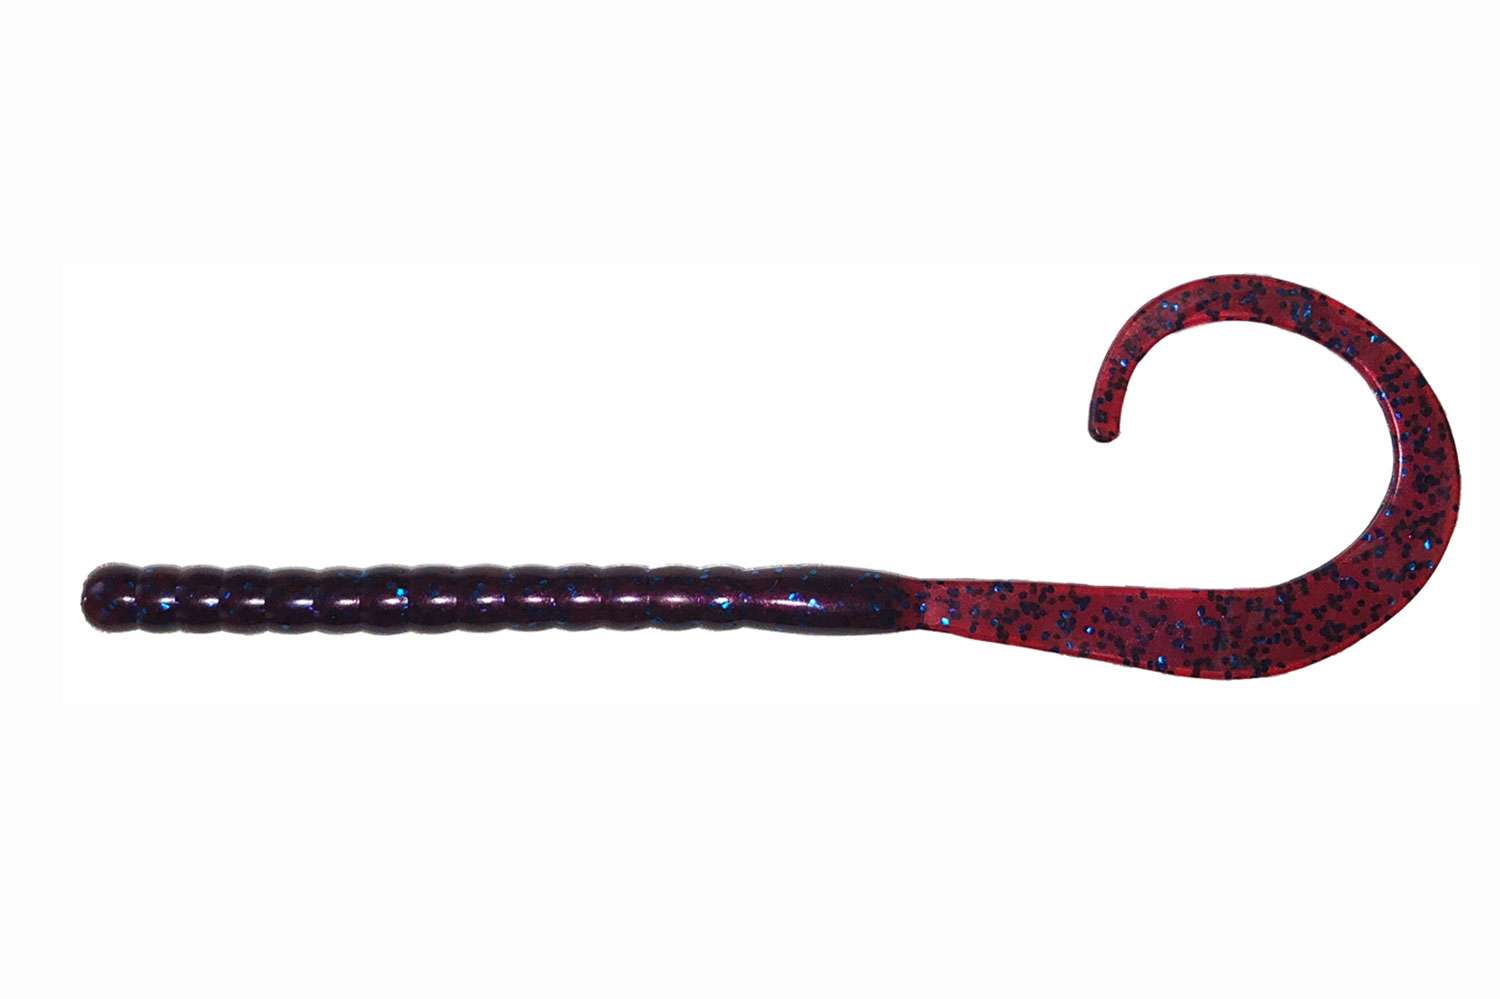 <p><b>X Zone 11-inch Blitz Worm</b></p>
Made from a specialized blend of soft plastic, when fished with weight the Blitz Worm will stand with its tail straight up off the bottom to tempt fish into striking.
The centerline on the bottom of the bait allows for perfectly straight rigging every time. Try them Texas rigged and hold on! Infused with super fine salt and a secret scent formula for an added level of attraction that will make bass hold on longer once they strike. Available in a range of custom blended colors, the X Zone Lures Blitz Worm delivers a big and bold presentation that will put bigger fish in the boat.
<br>
<p><b>MSRP: $4.99</b></p>
<a href=